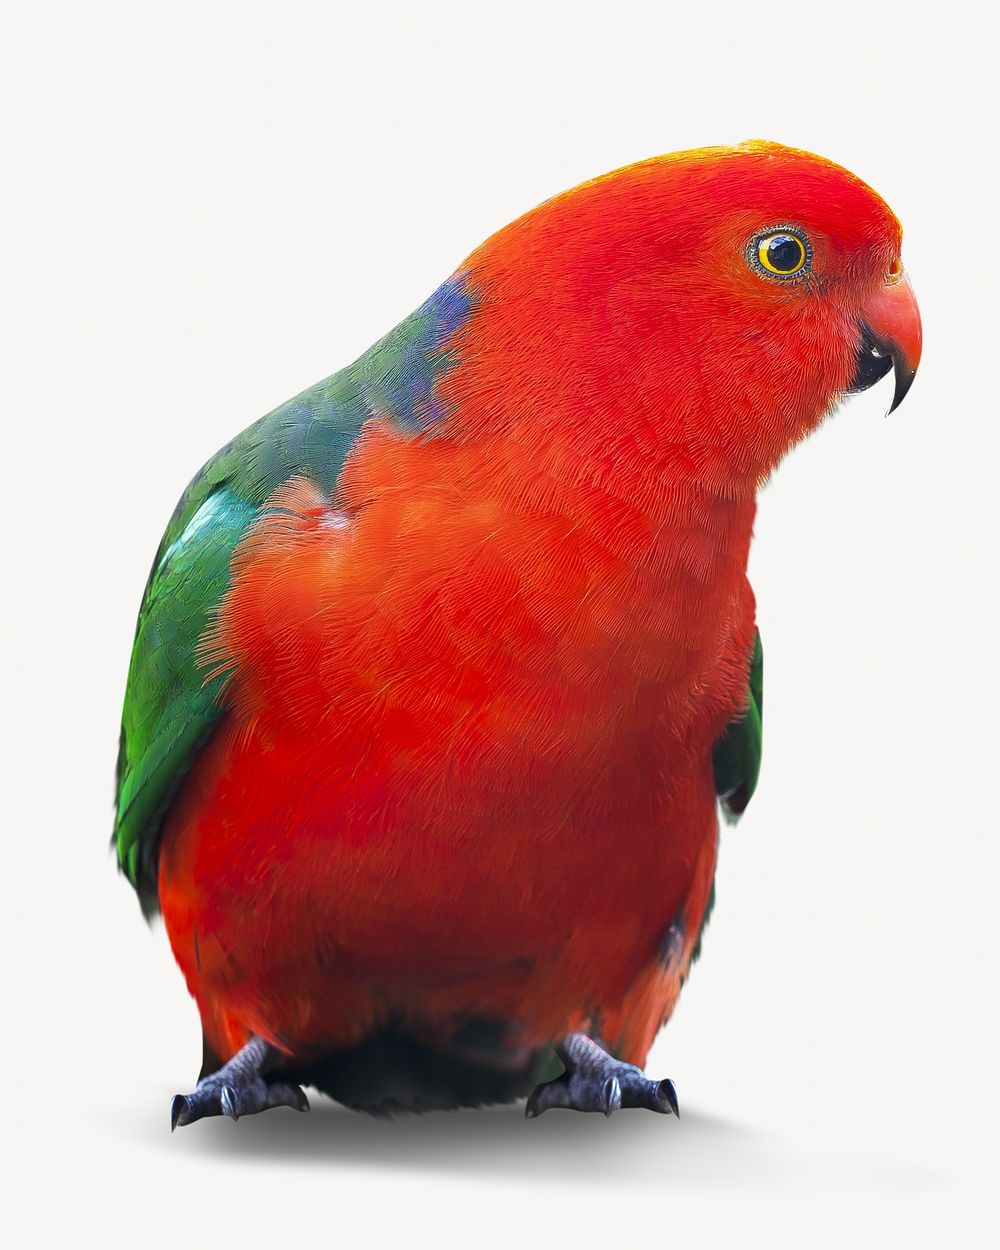 Red parrot image on white